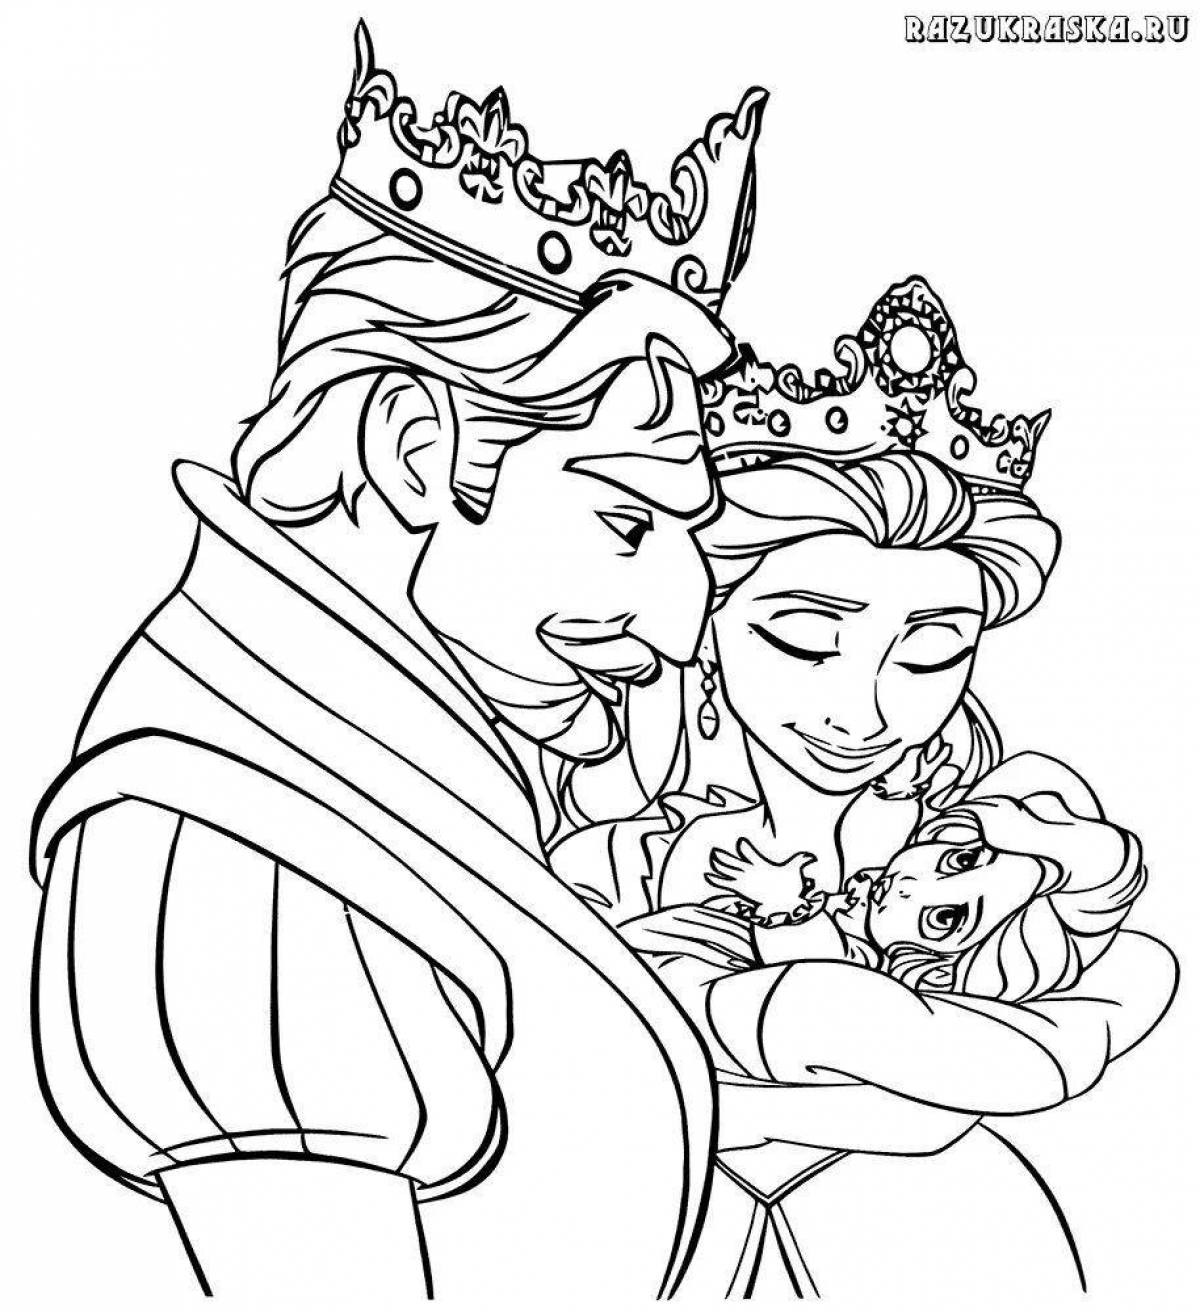 Amazing king and queen coloring pages